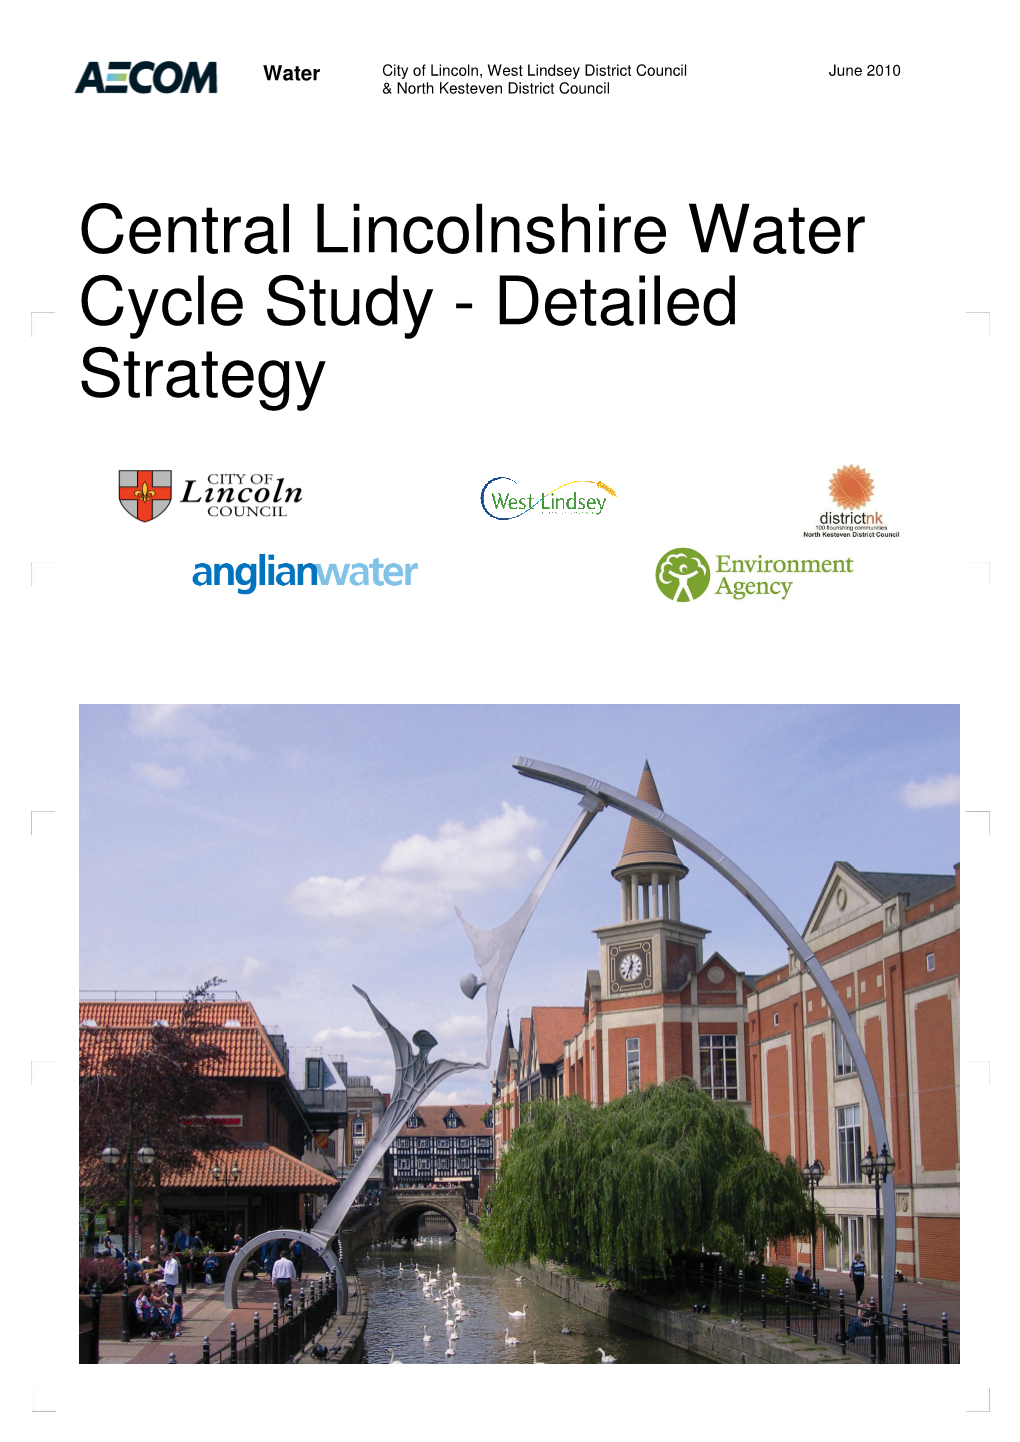 Central Lincolnshire Water Cycle Study - Detailed Strategy